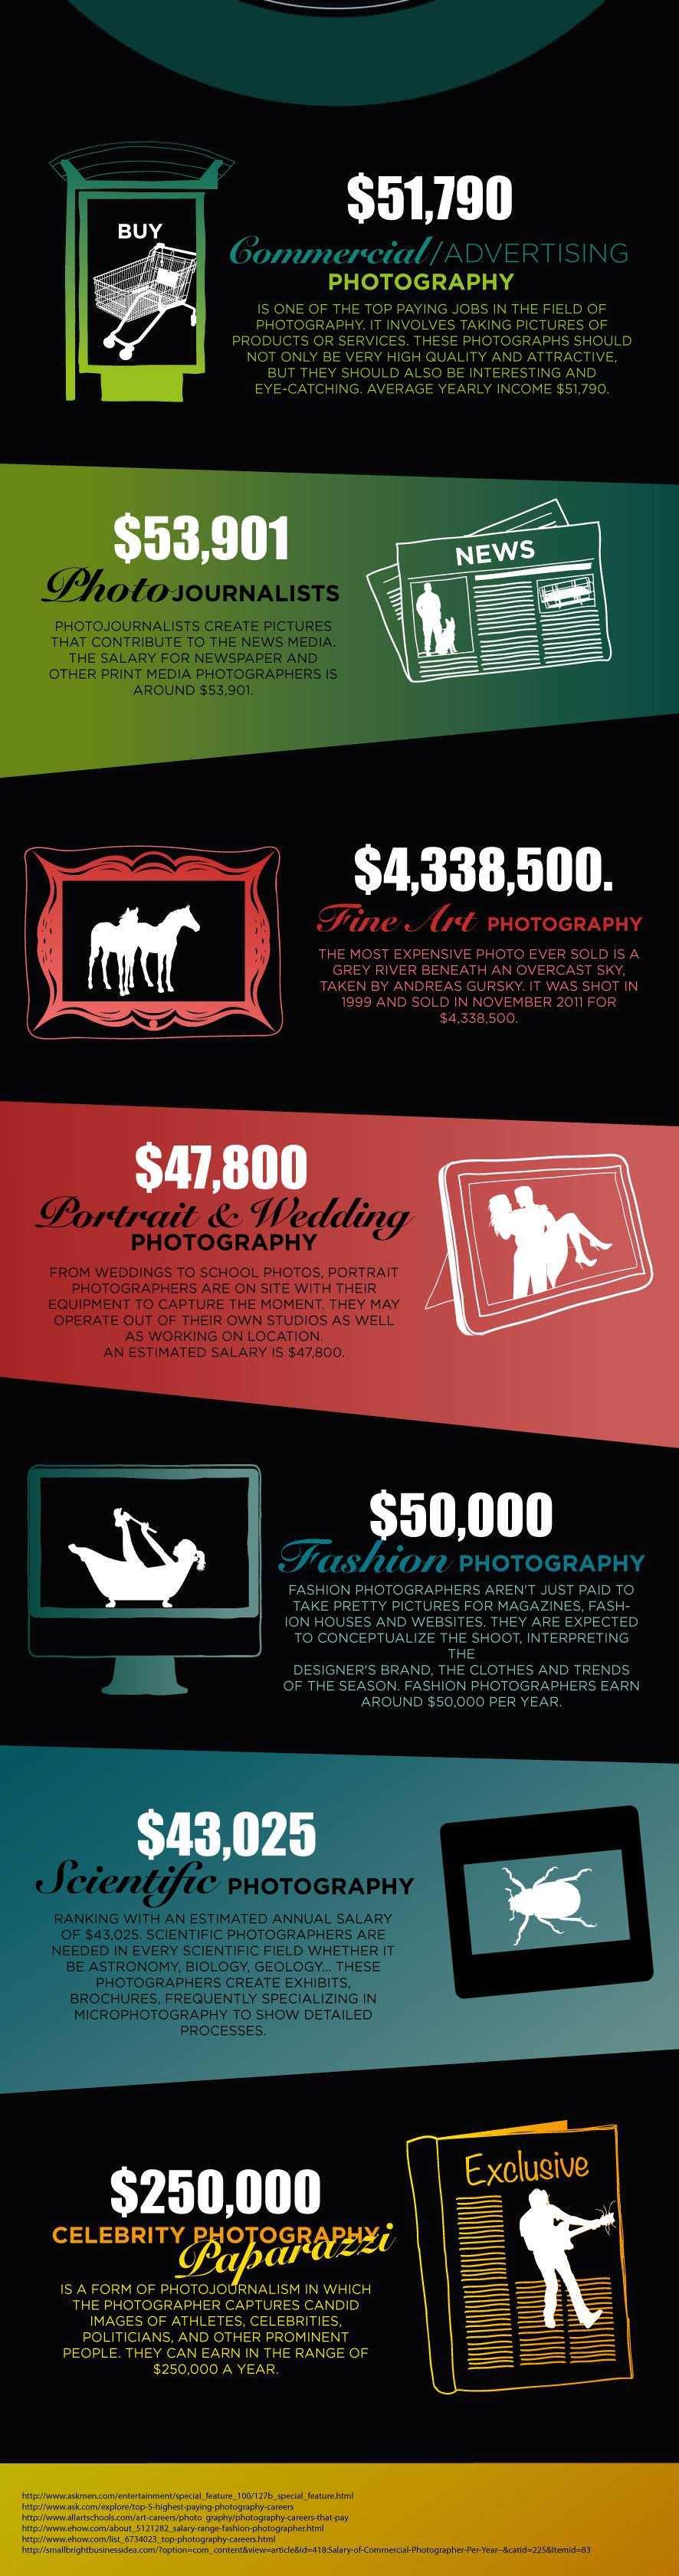 Top Paying Photography Jobs image 